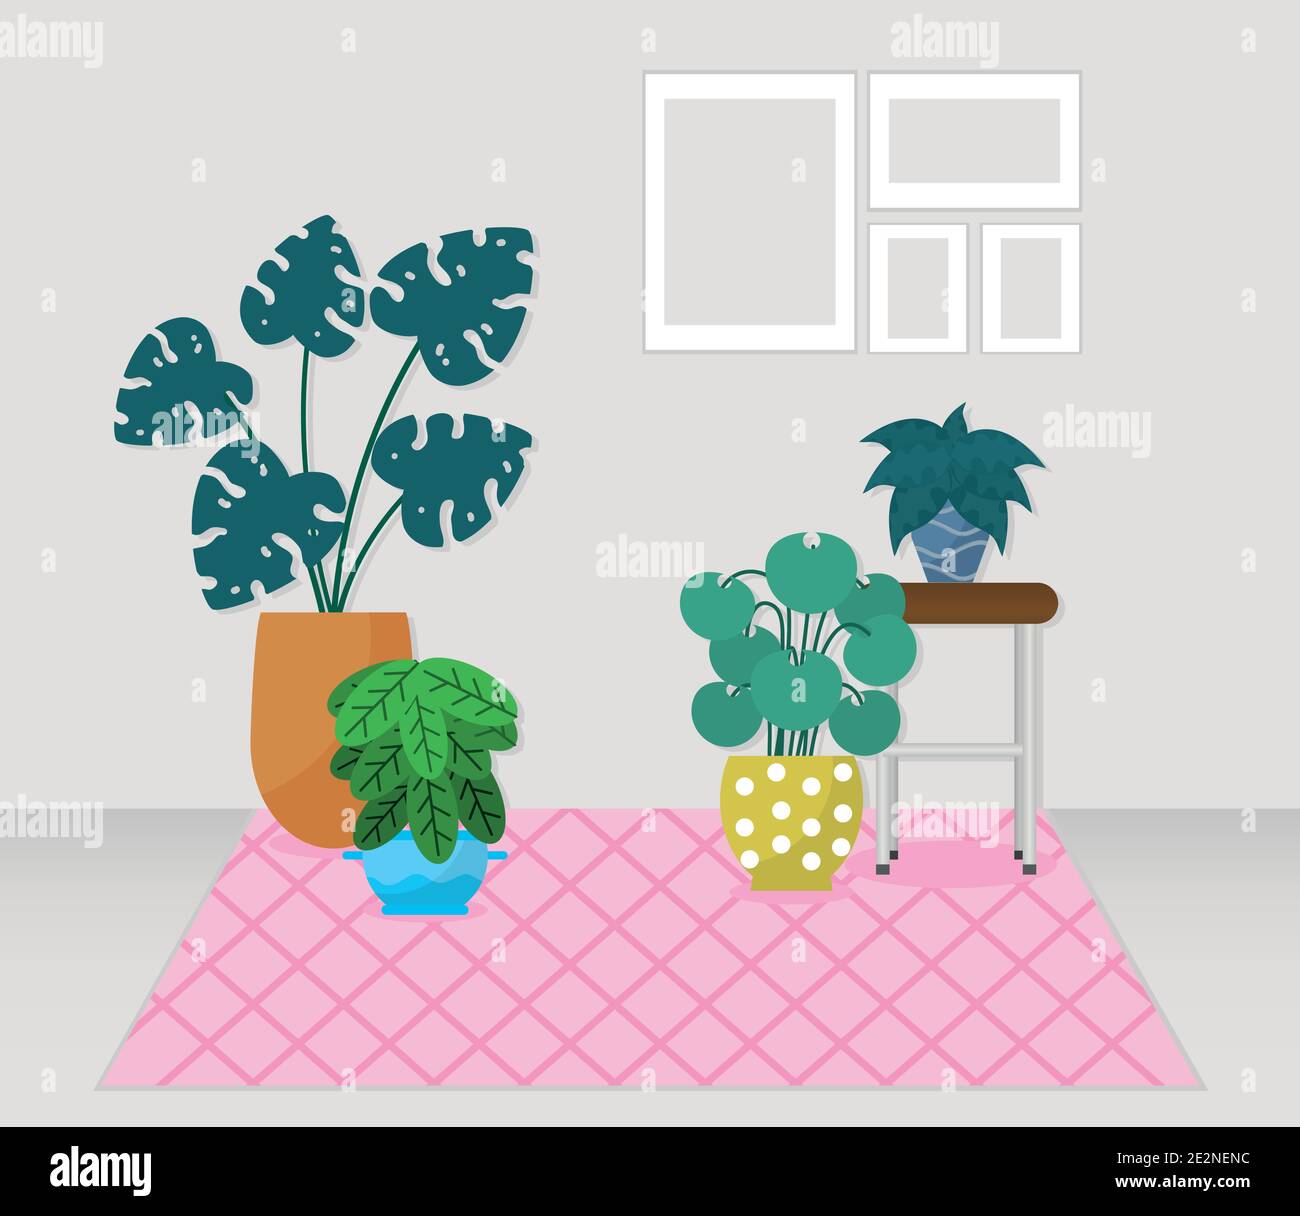 indoor house space with beautiful plants around over white background, colorful design, vector illustration Stock Vector